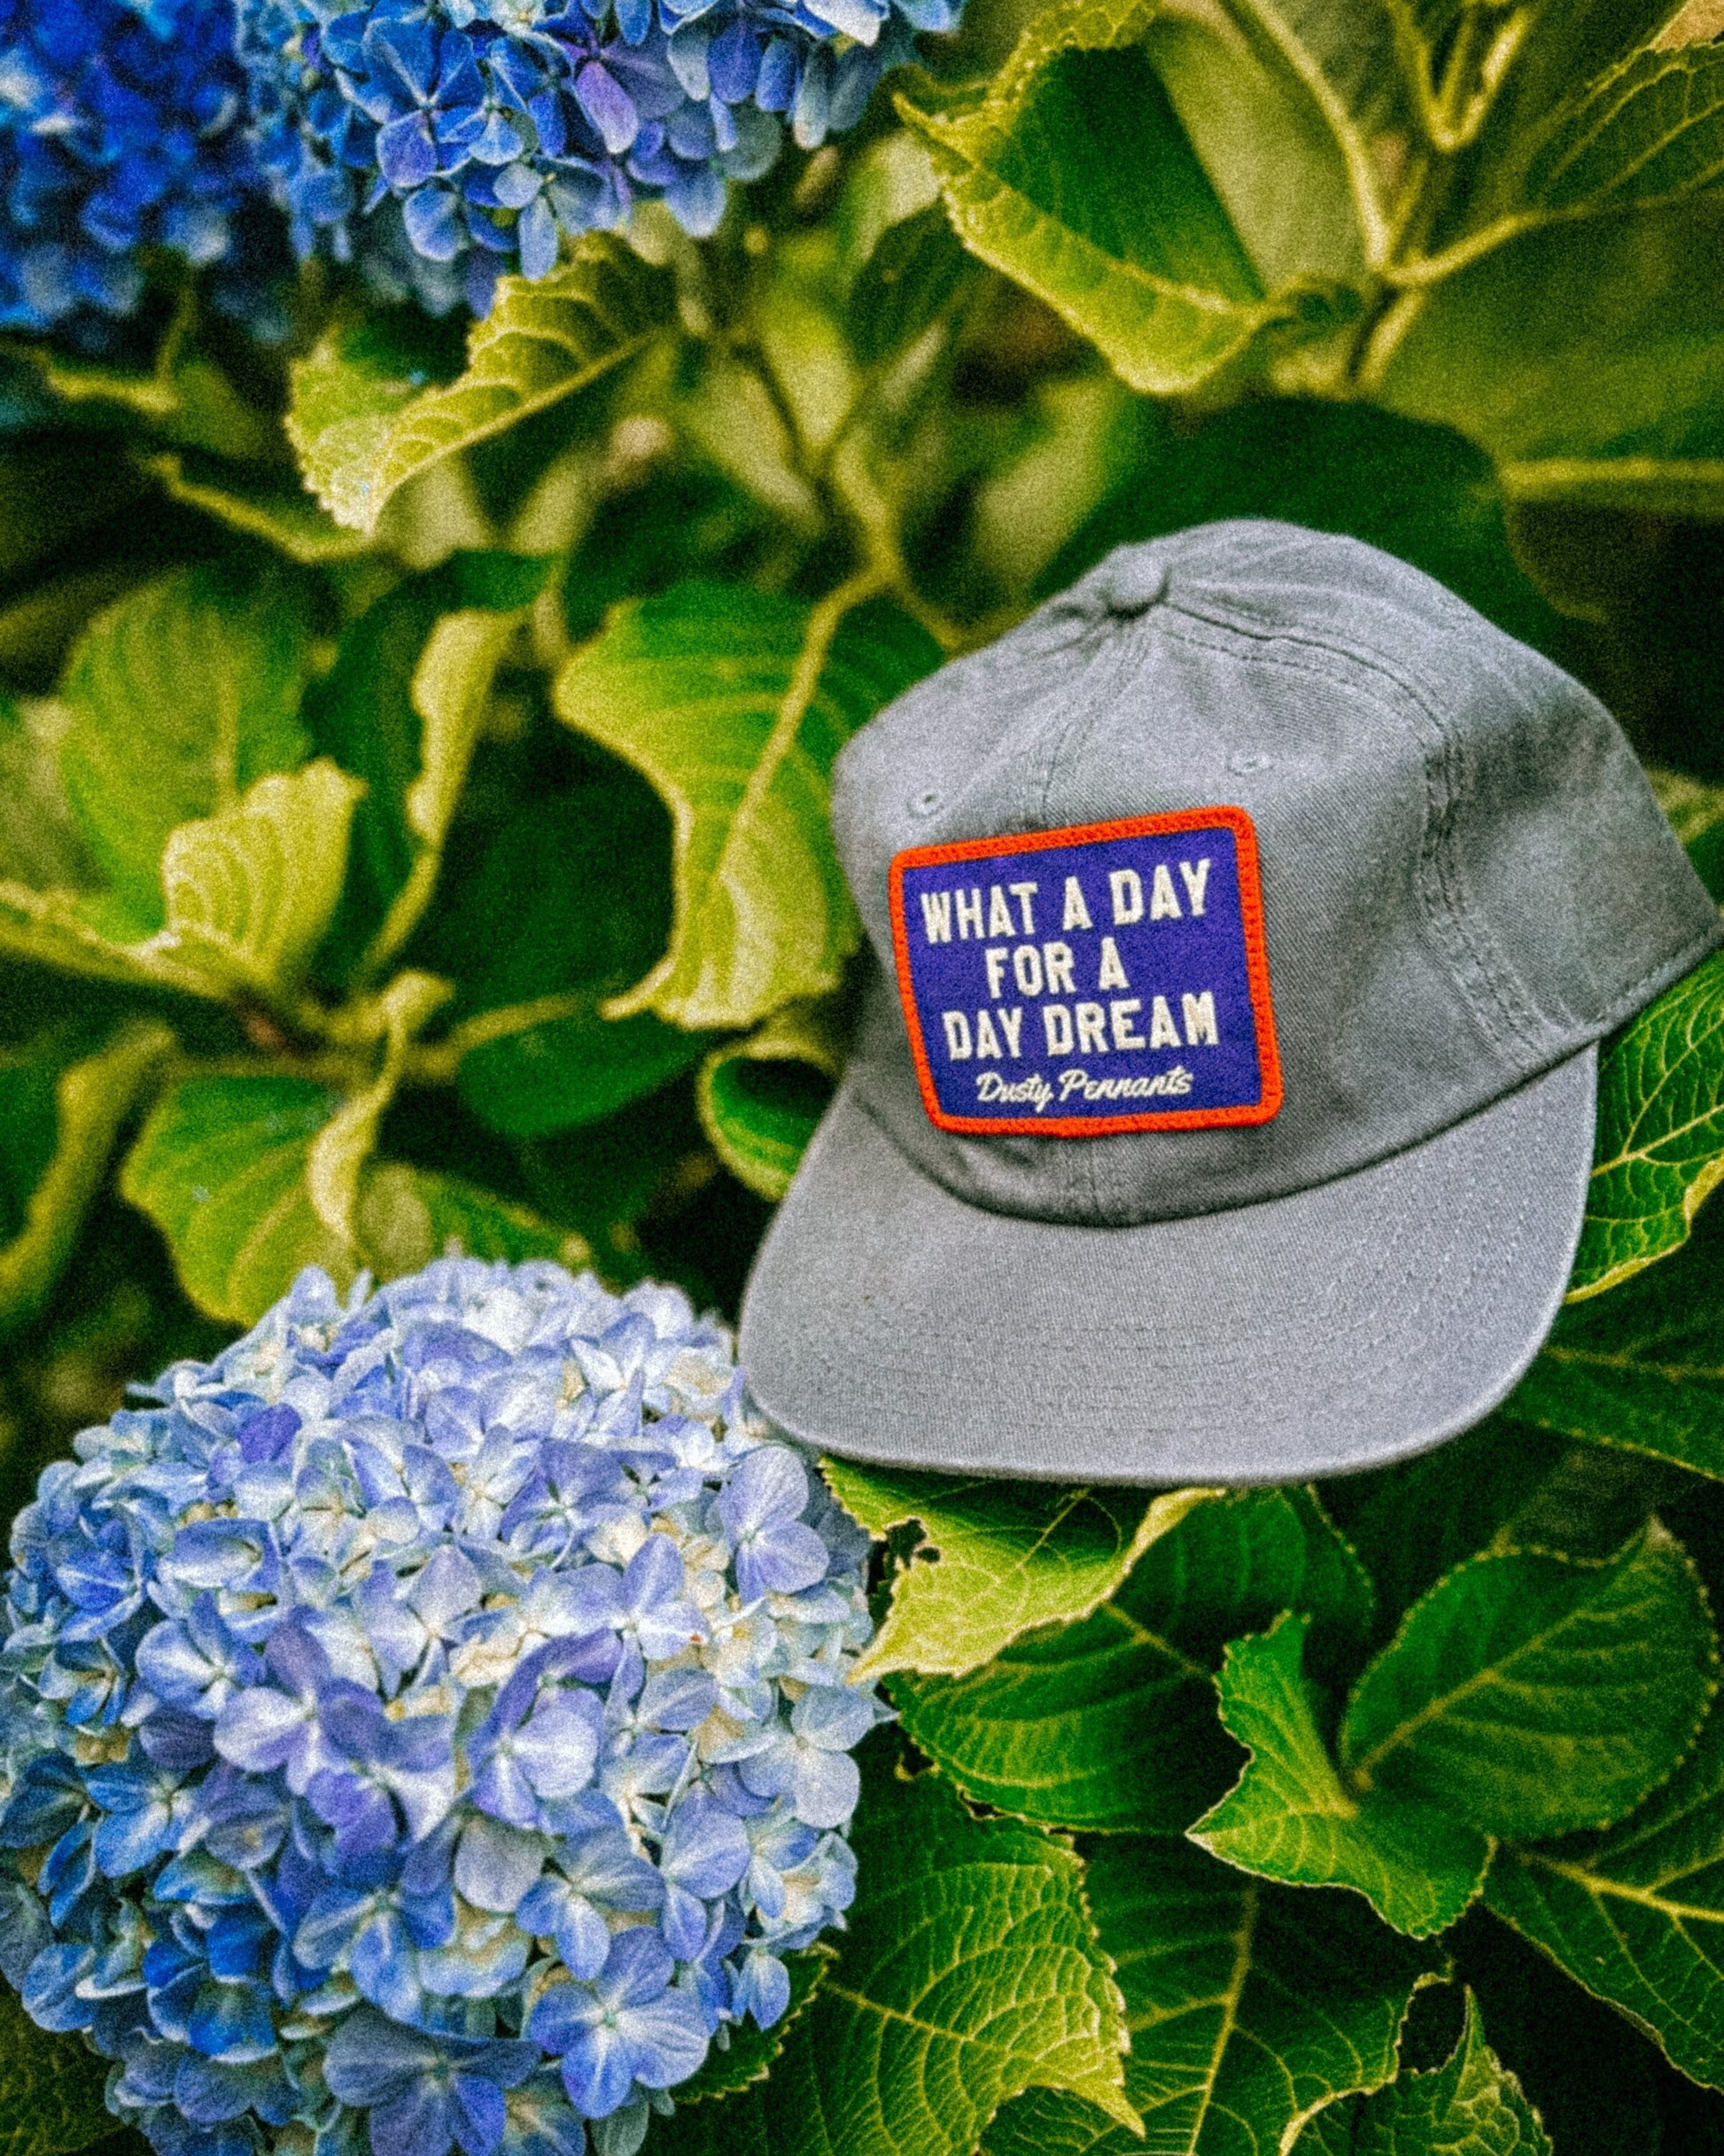 What a day for a daydream Patch Cap | faded unstructured vintage style navy baseball hat.